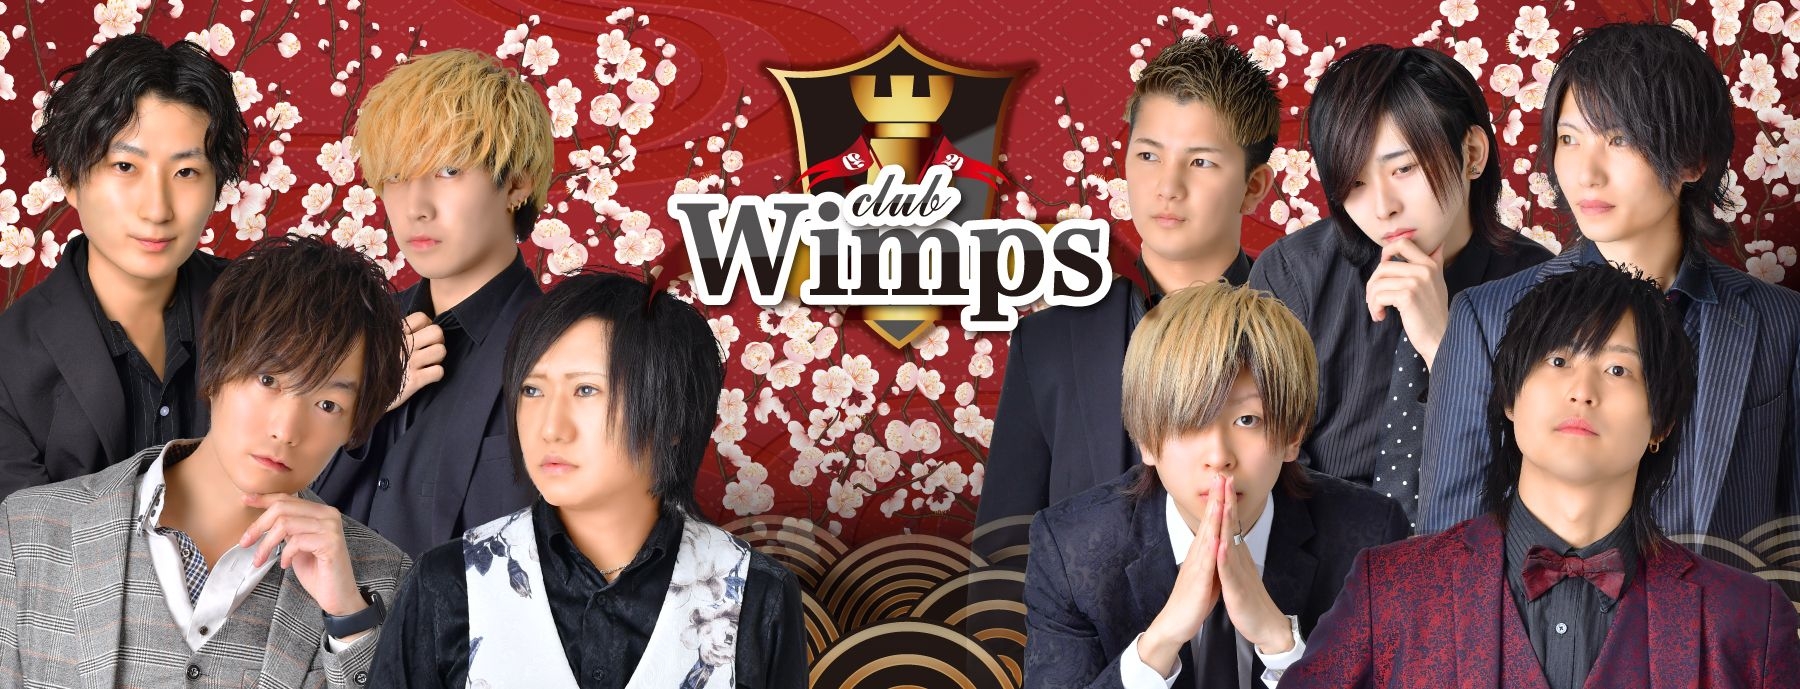 club Wimps～ウィンプス～